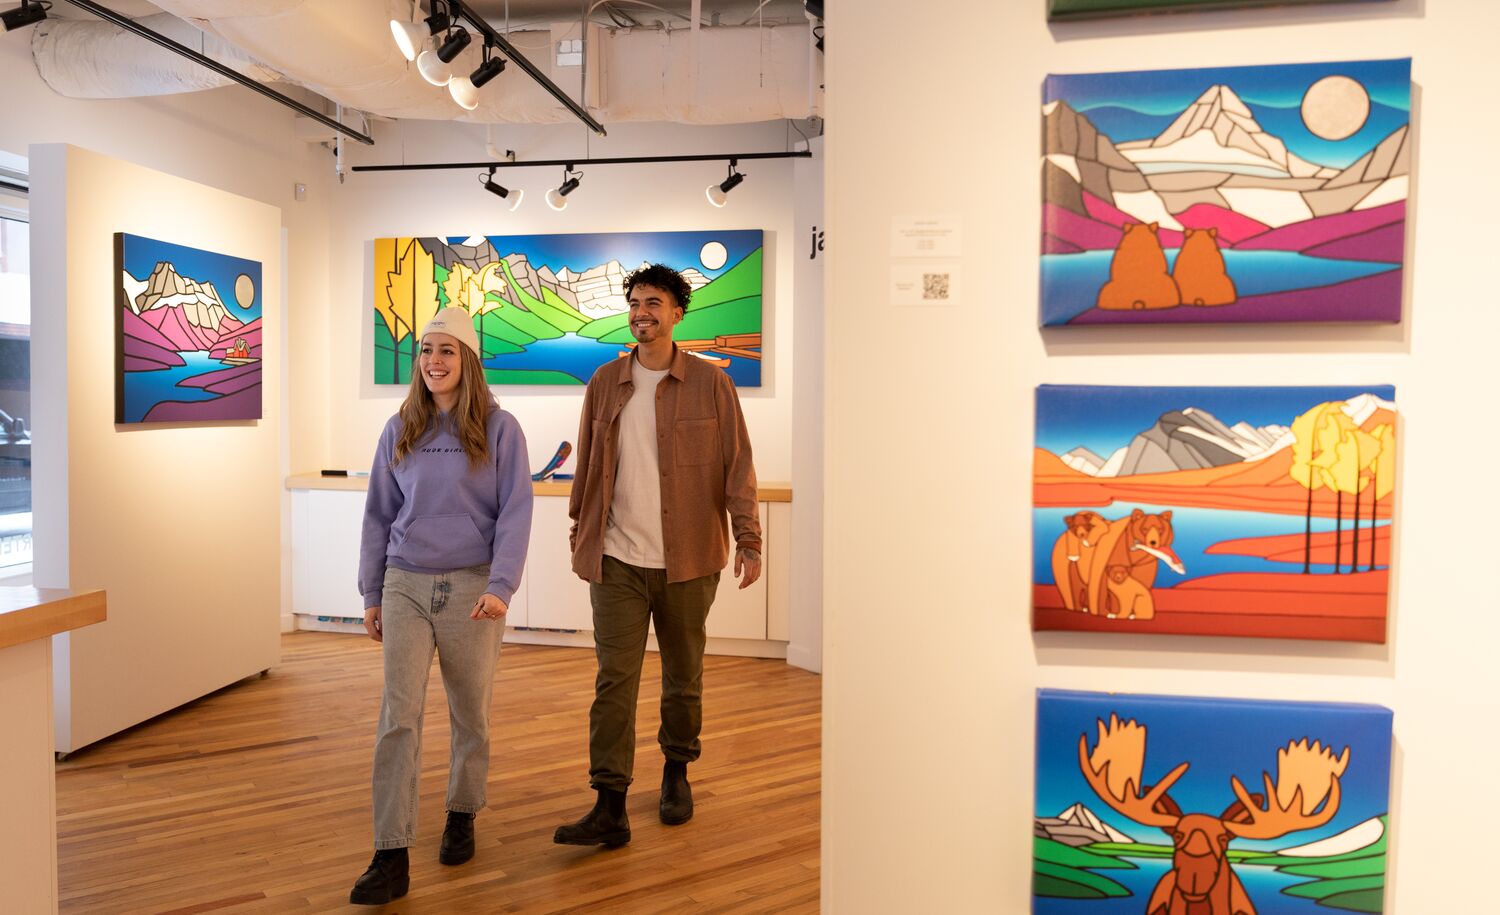 Two people walk through the Ryan Carter Gallery in Banff National Park.